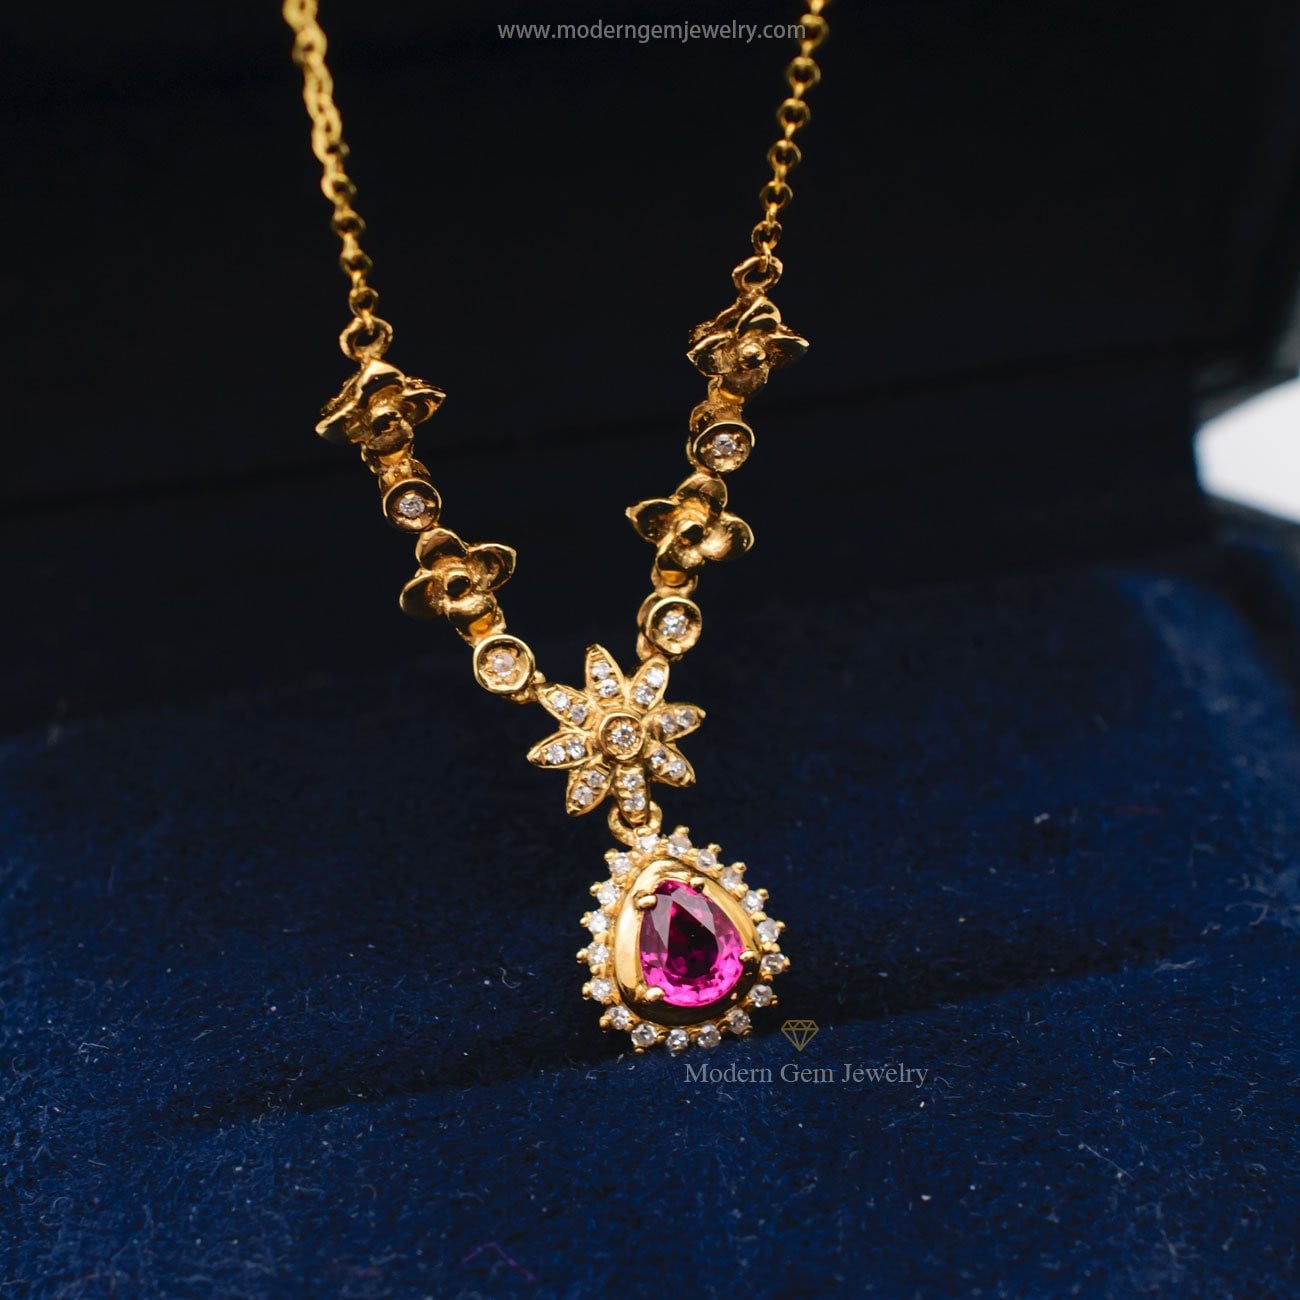 Antique Style Necklace with Ruby and Diamonds | Saratti